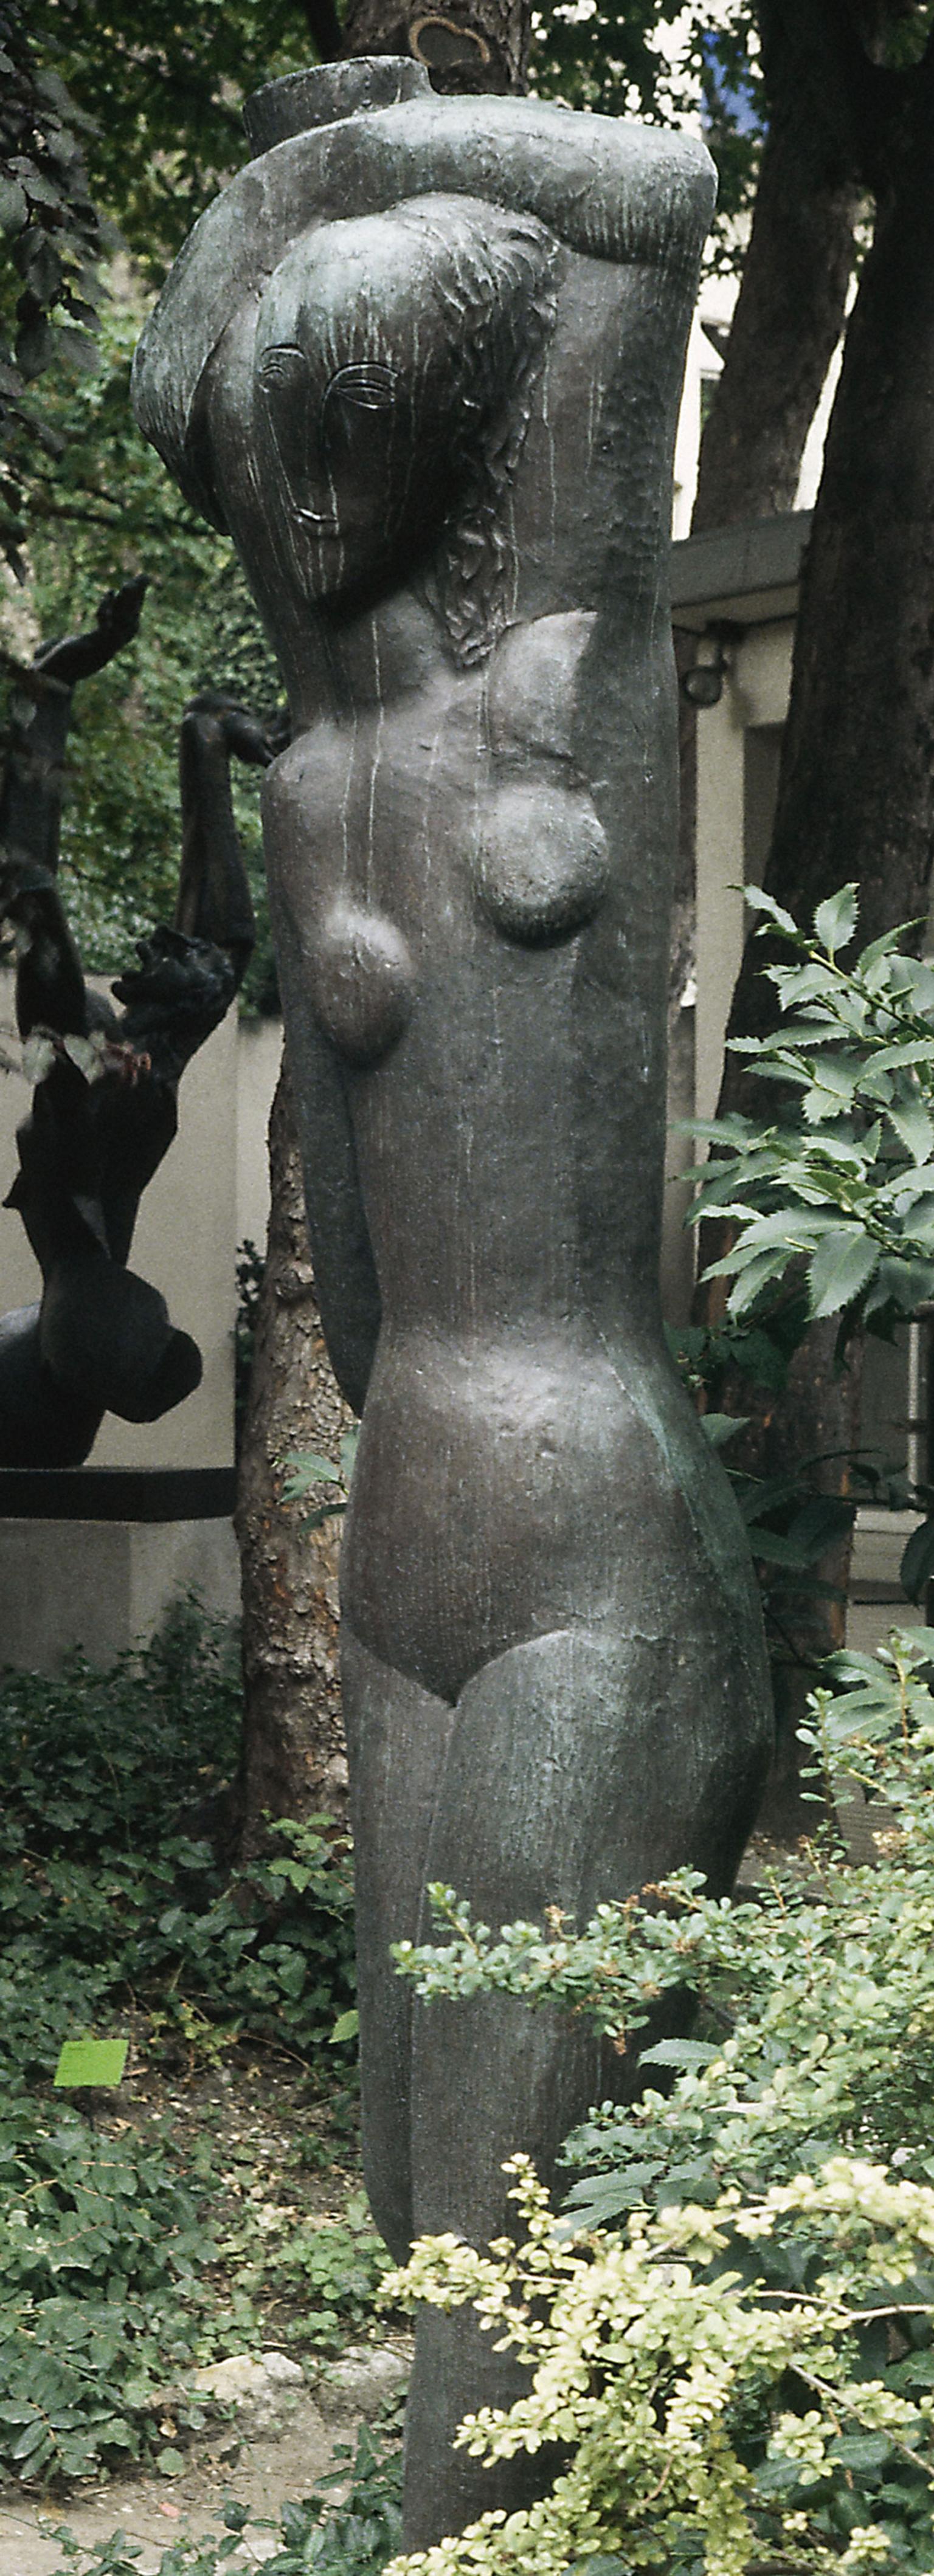 Sculpture of stylized nude woman carrying water over her head.